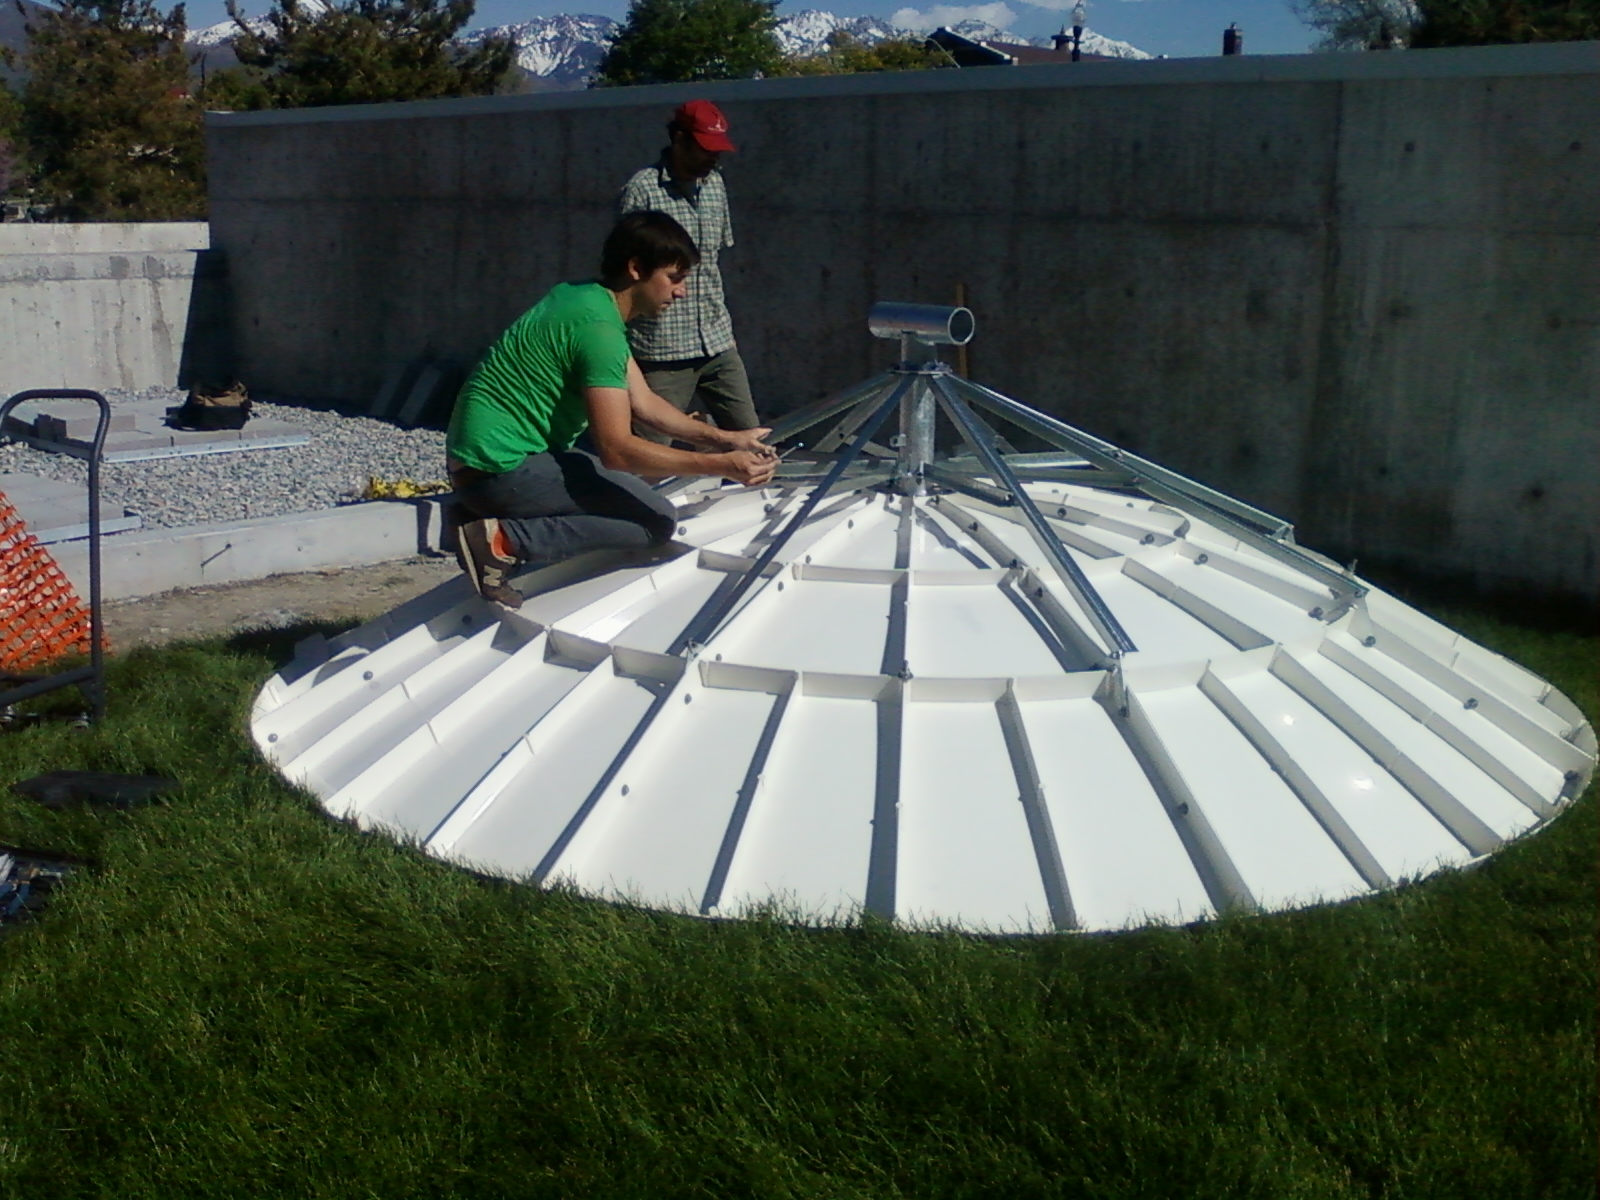 May 12, 2011: KCPW employees piece the dish together